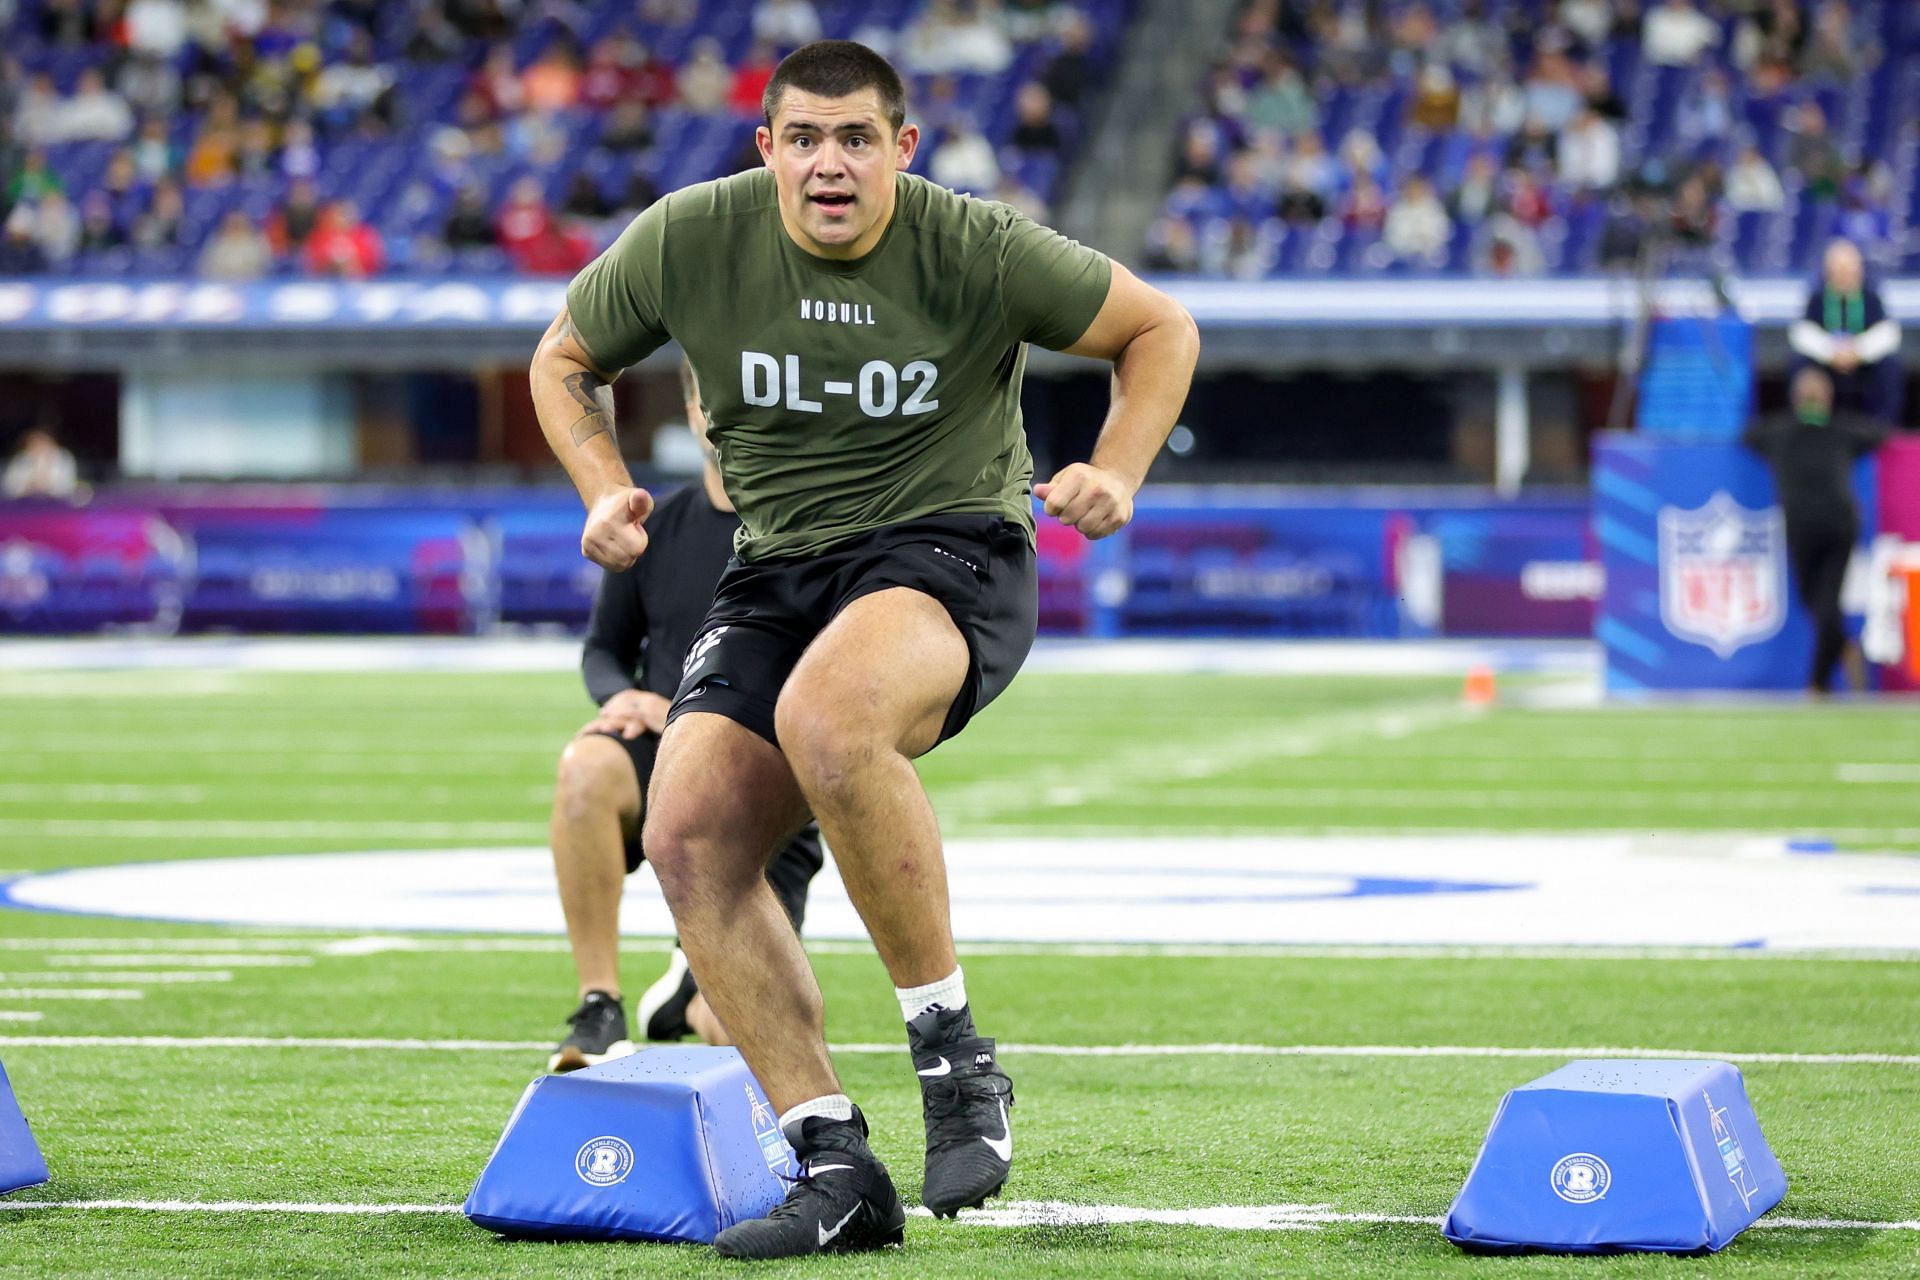 Bryan Bresee is the most physically dominant defensive lineman in the 2023 NFL Draft